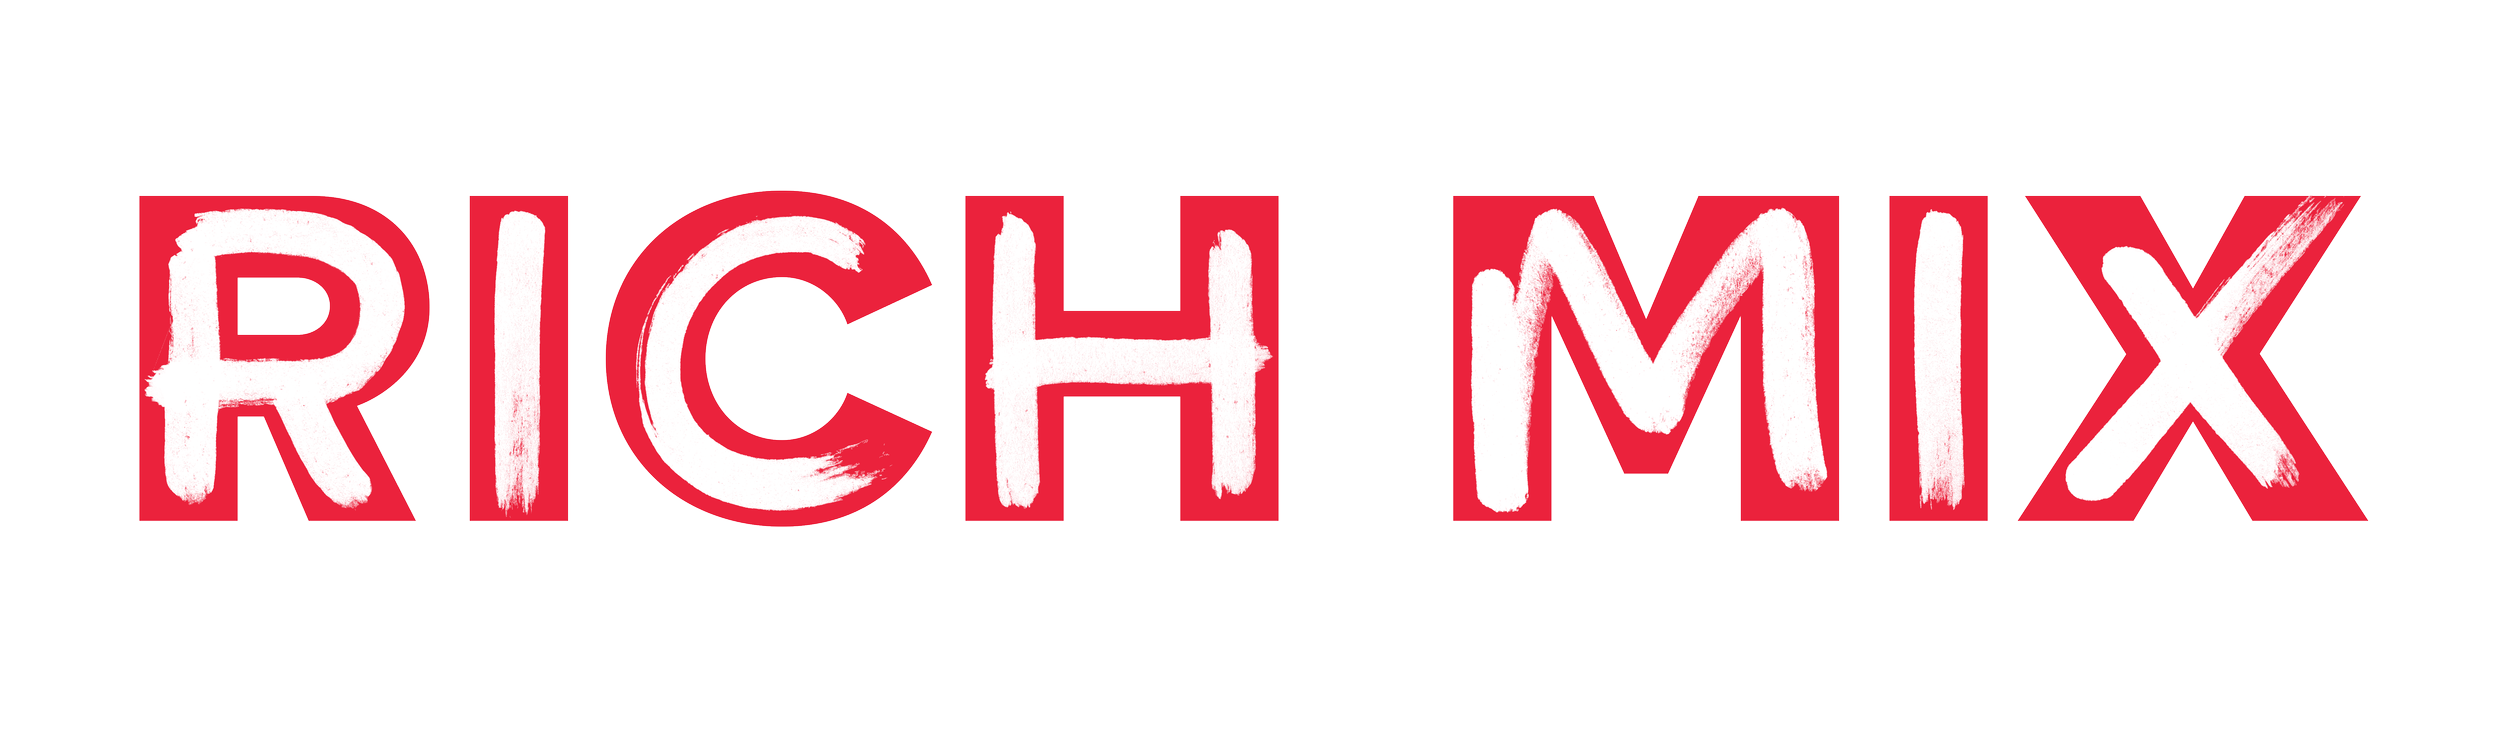 Rich-Mix-Logo-white-on-red.png